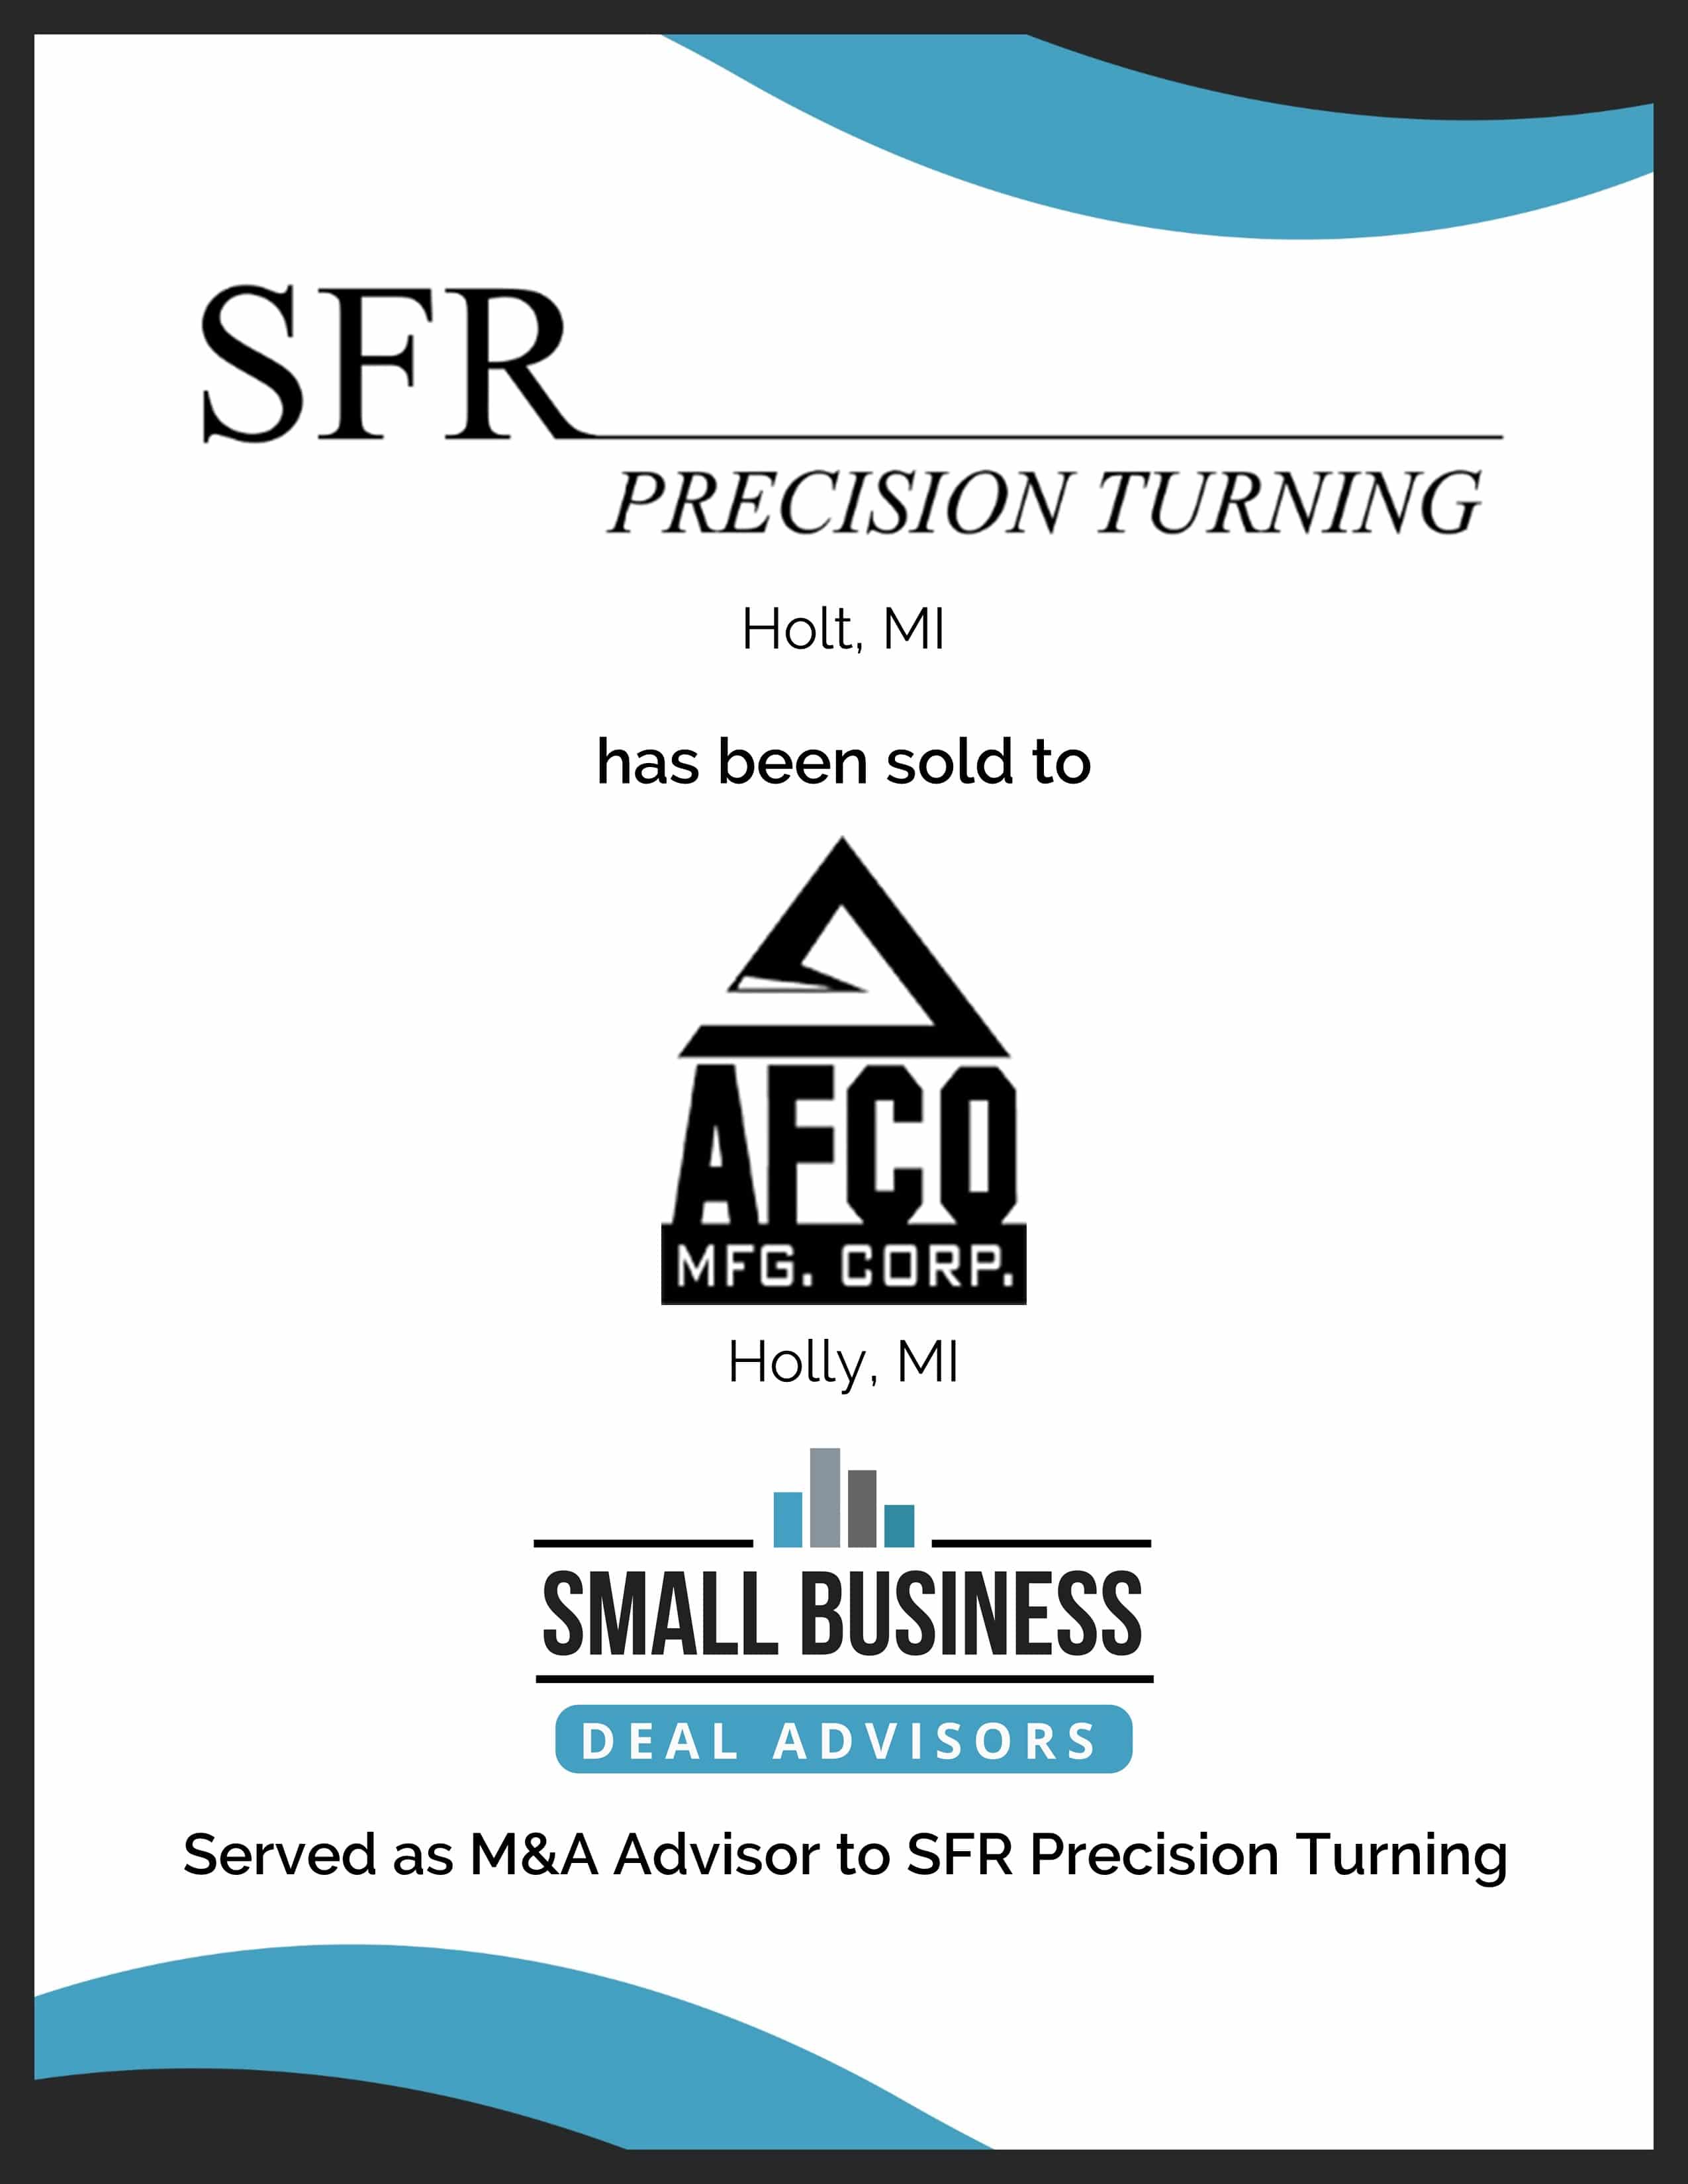 SFR Precision Turning has been sold to AFCO Manufacturing